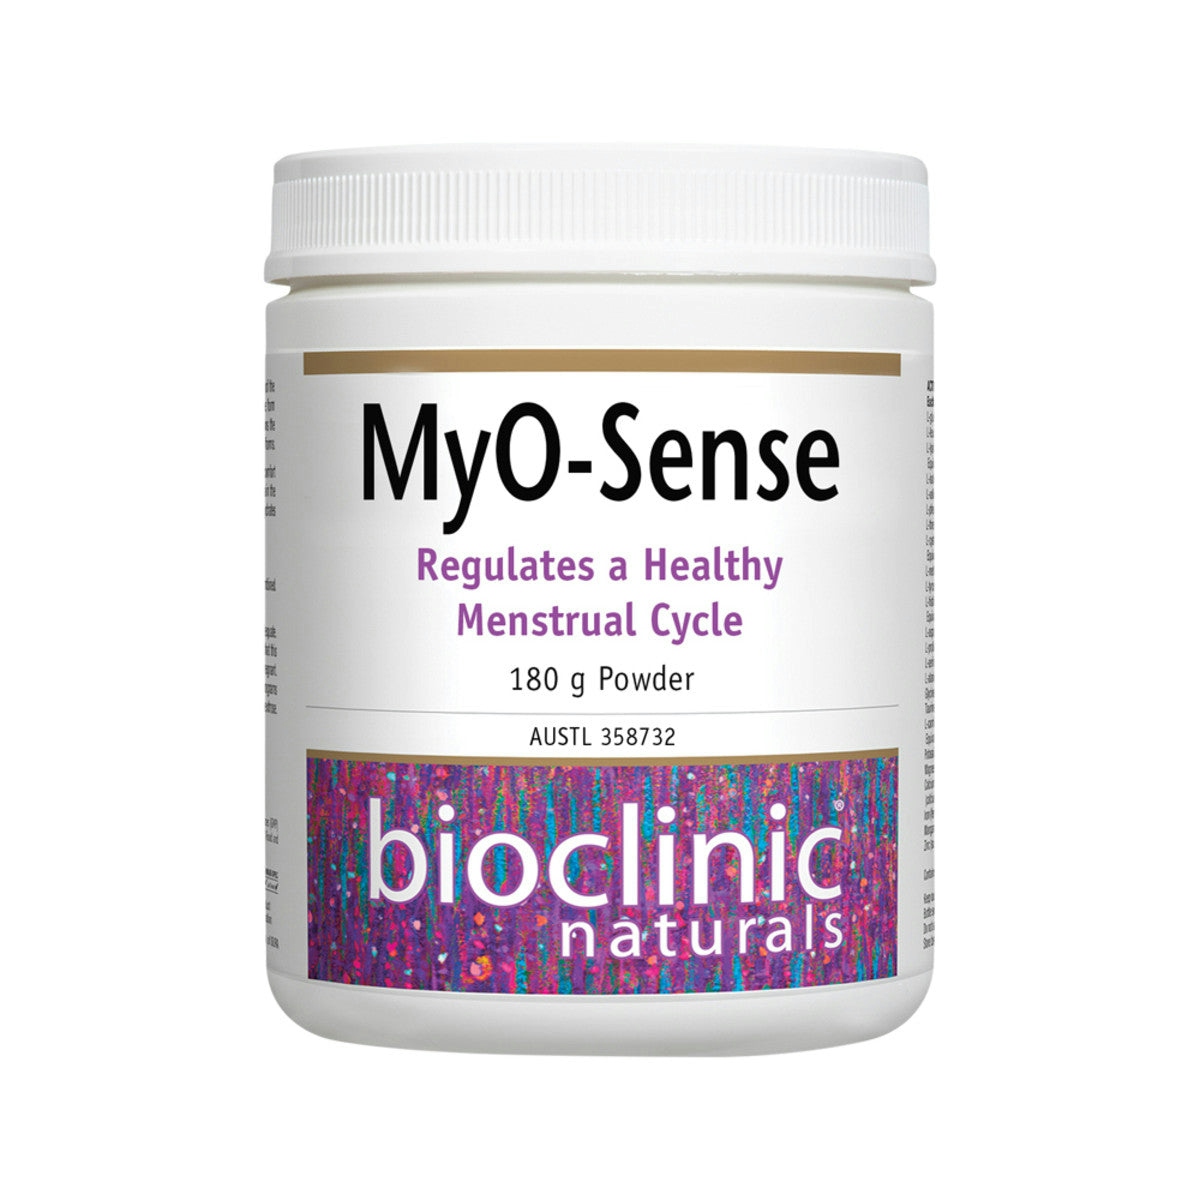 Image of Bioclinic Naturals MyOSense 180g with a white background